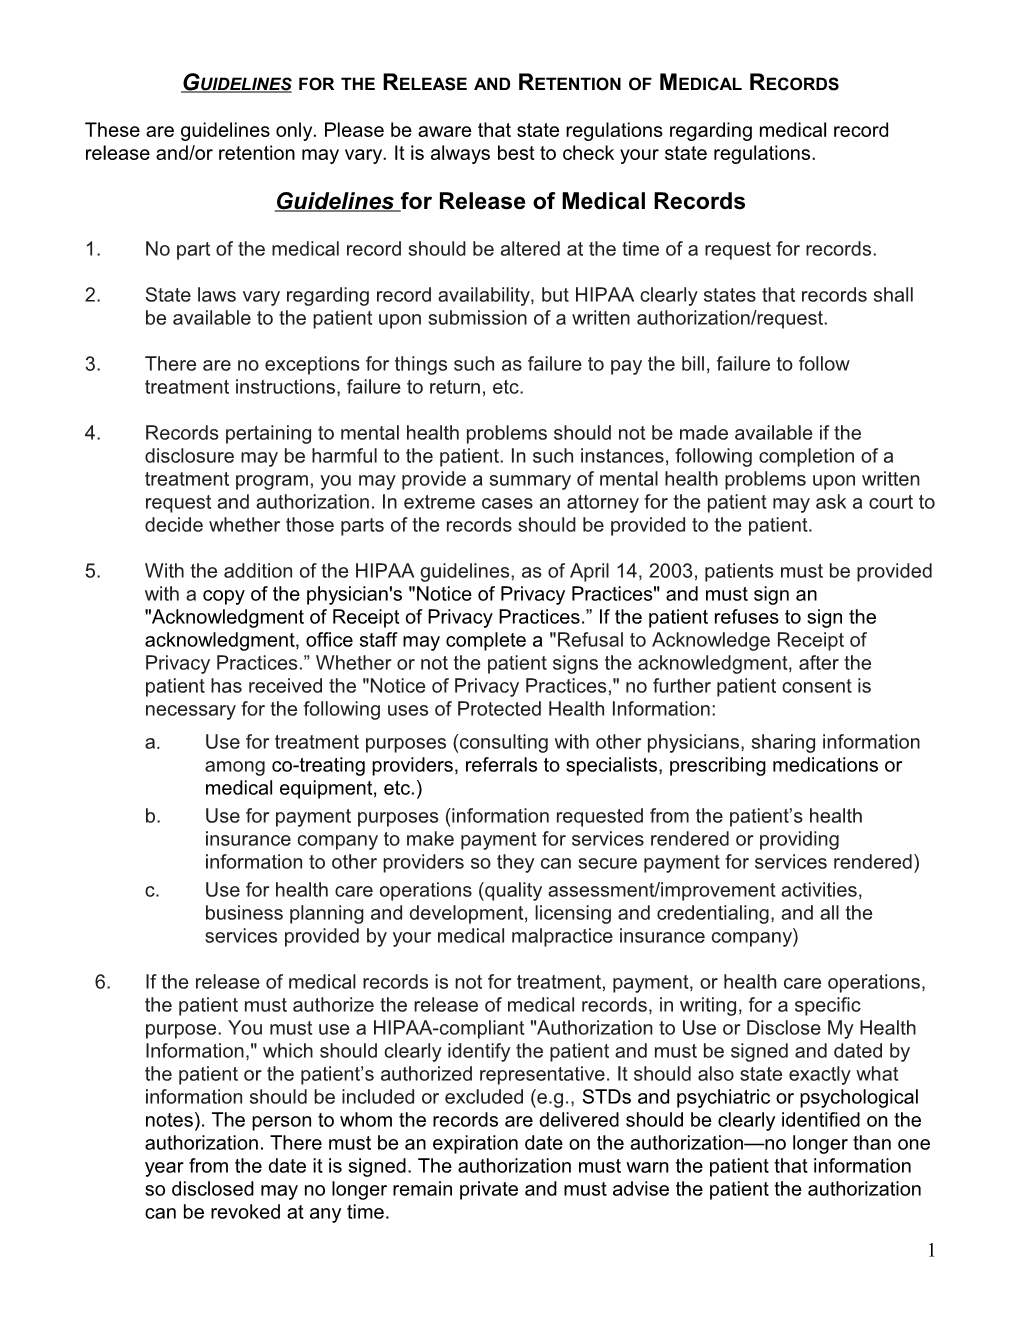 Guidelines for the Release and Retention of Medical Records